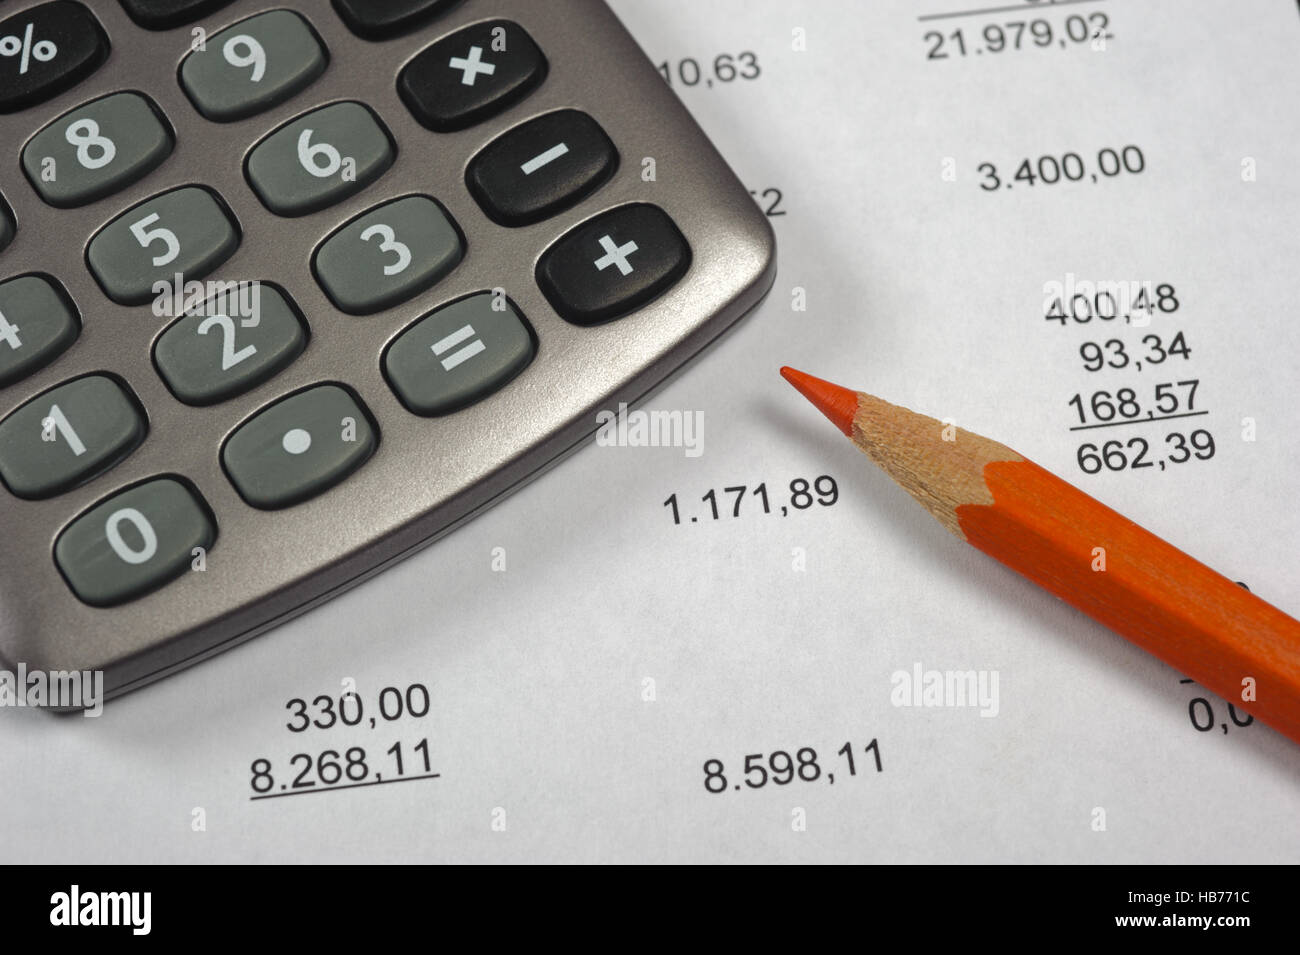 financial accounting with calculator Stock Photo